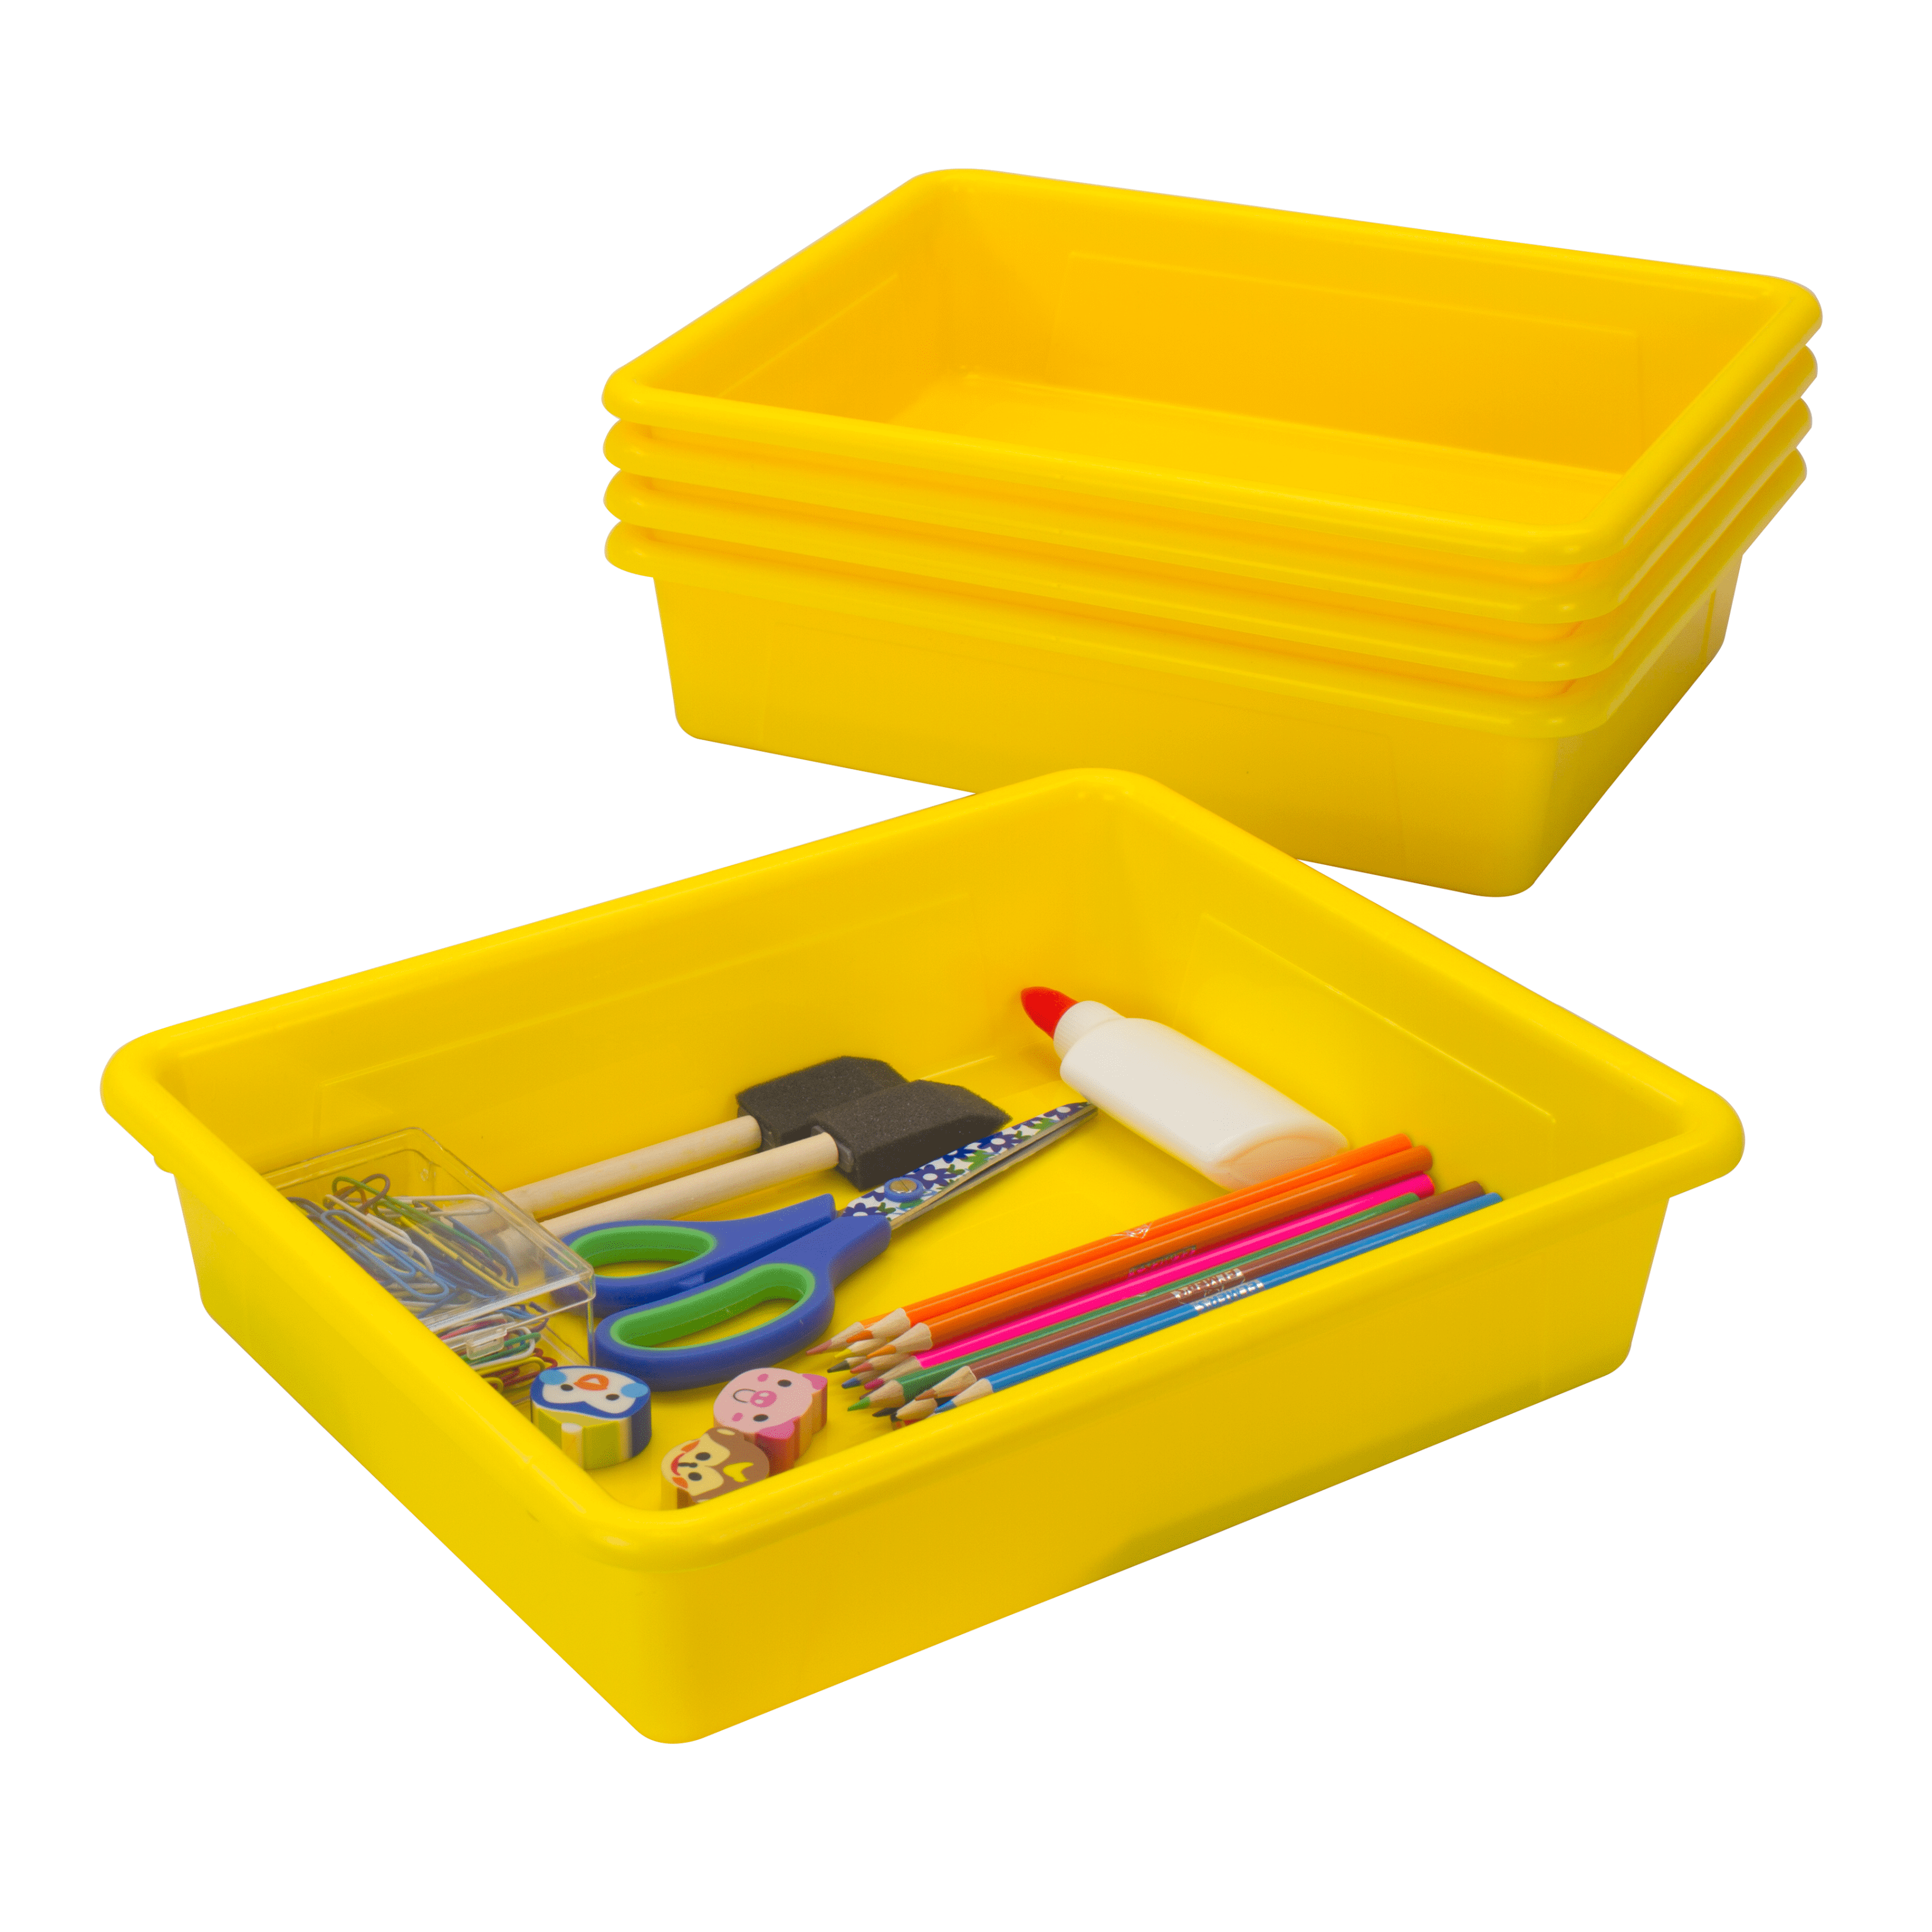 Storex Sorting and Crafts Tray, 8 x 9.5 Inches, Assorted Colors, 48-Pack